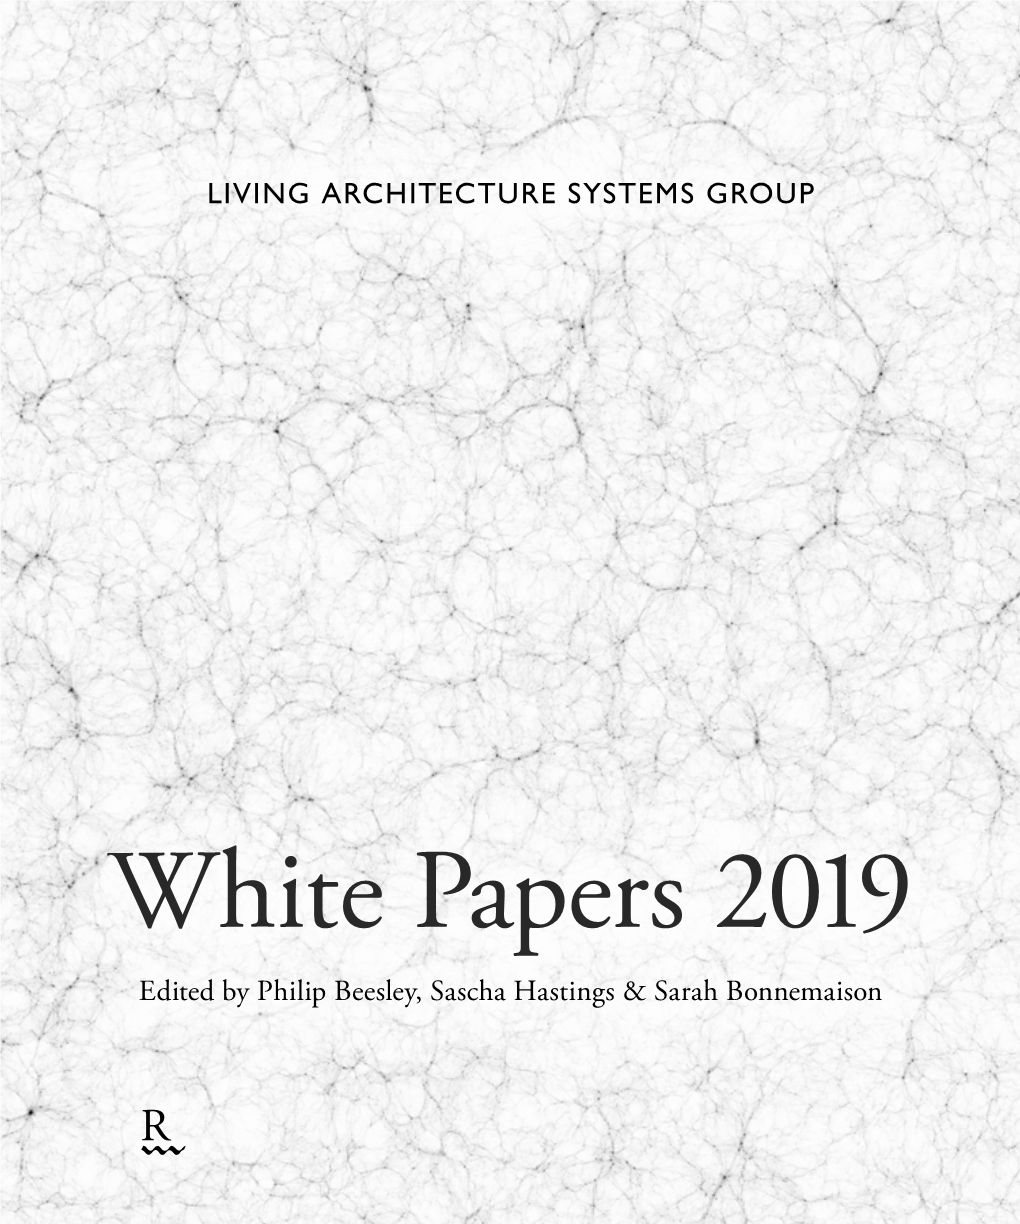 White Papers 2019 Edited by Philip Beesley, Sascha Hastings & Sarah Bonnemaison